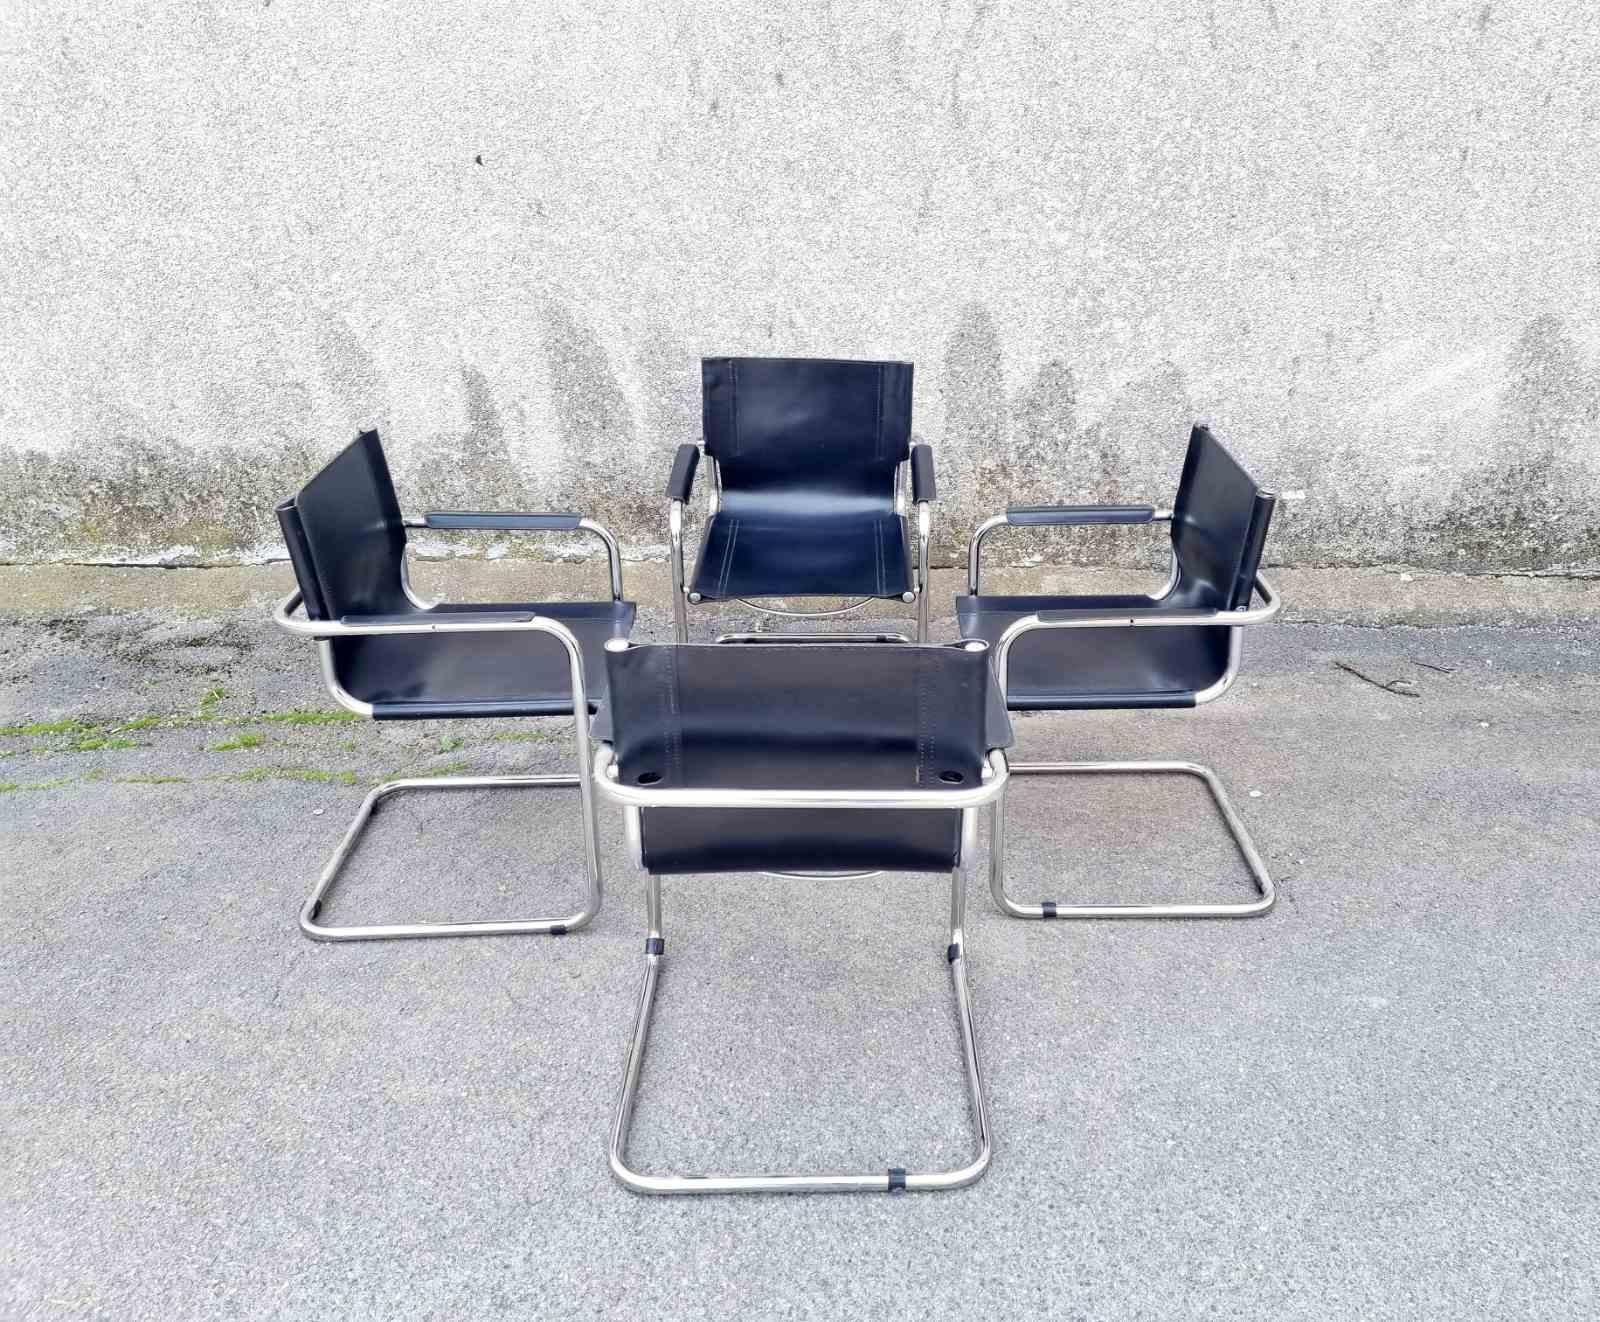 Set of 4 Bauhaus cantilever dining chairs designed by Mart Stam and produce by Matteo Grassi in the 1970s. 
Black original leather in almost perfect conditions

Model: MG5 Visitor chair
Material: black leather and chrome tubular metal